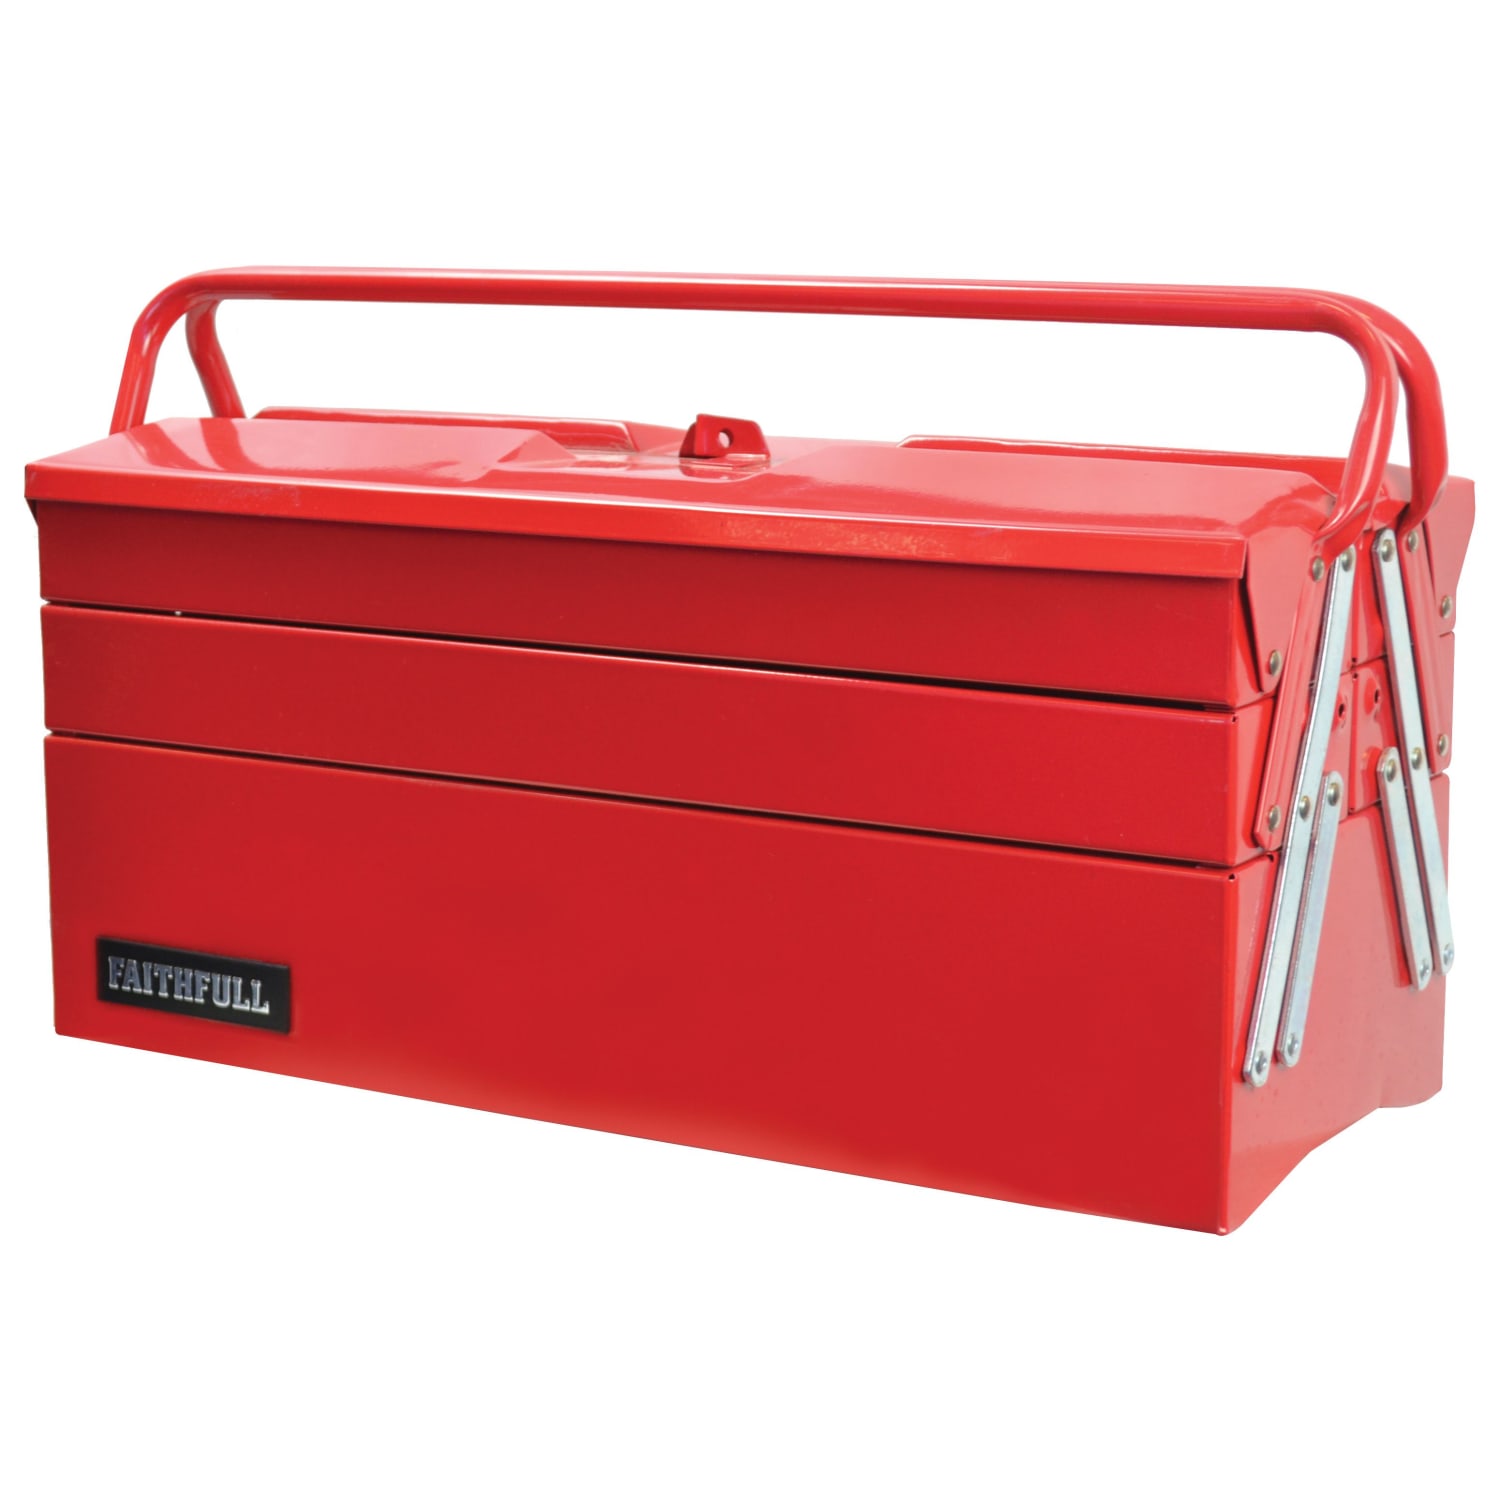 Faithfull - Metal Cantilever Toolbox - 5 Tray 49cm (19in)